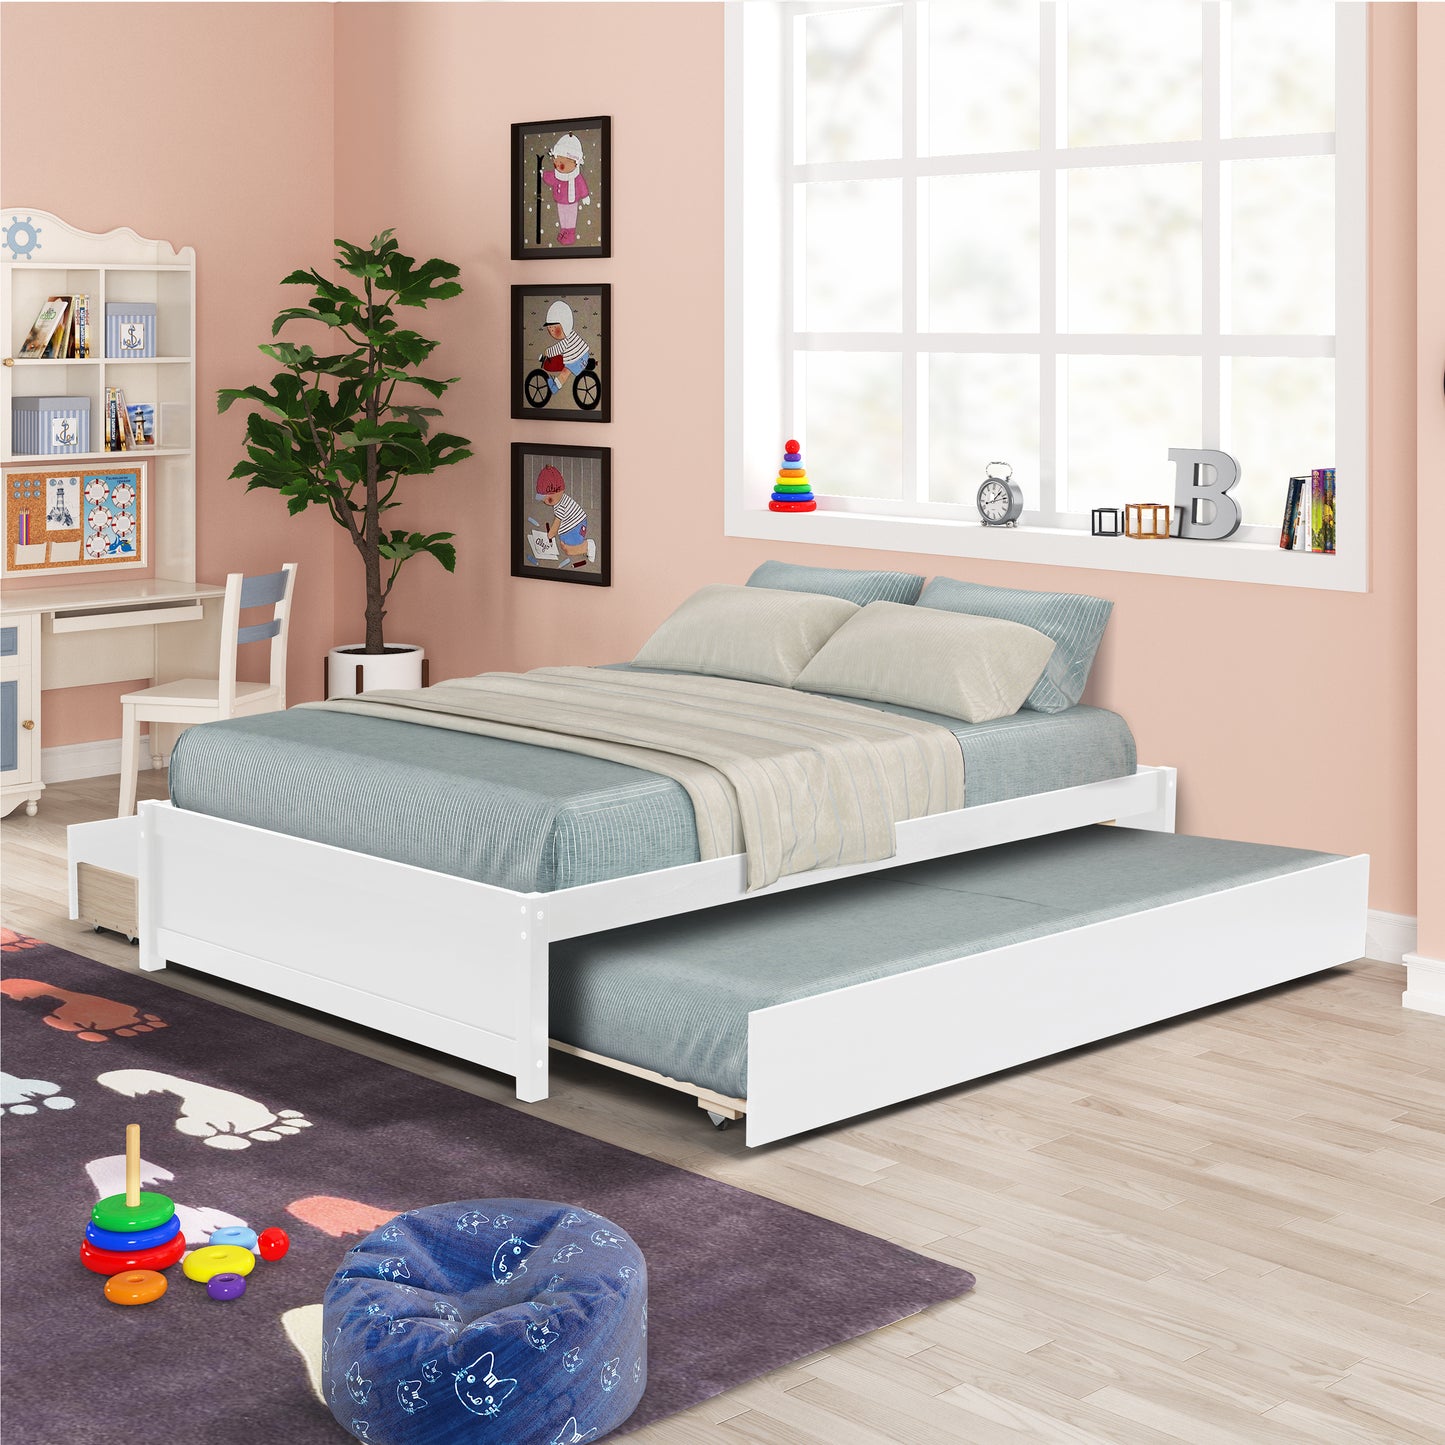 BTMWAY Full Bed Frame with Twin Trundle, Full Size Bed Frame No Box Spring Needed, Wood Full Platform Bed Frame with 2 Storage Drawers, Modern Bed Frame Full Size for Kids Teens Adults, White, R1575